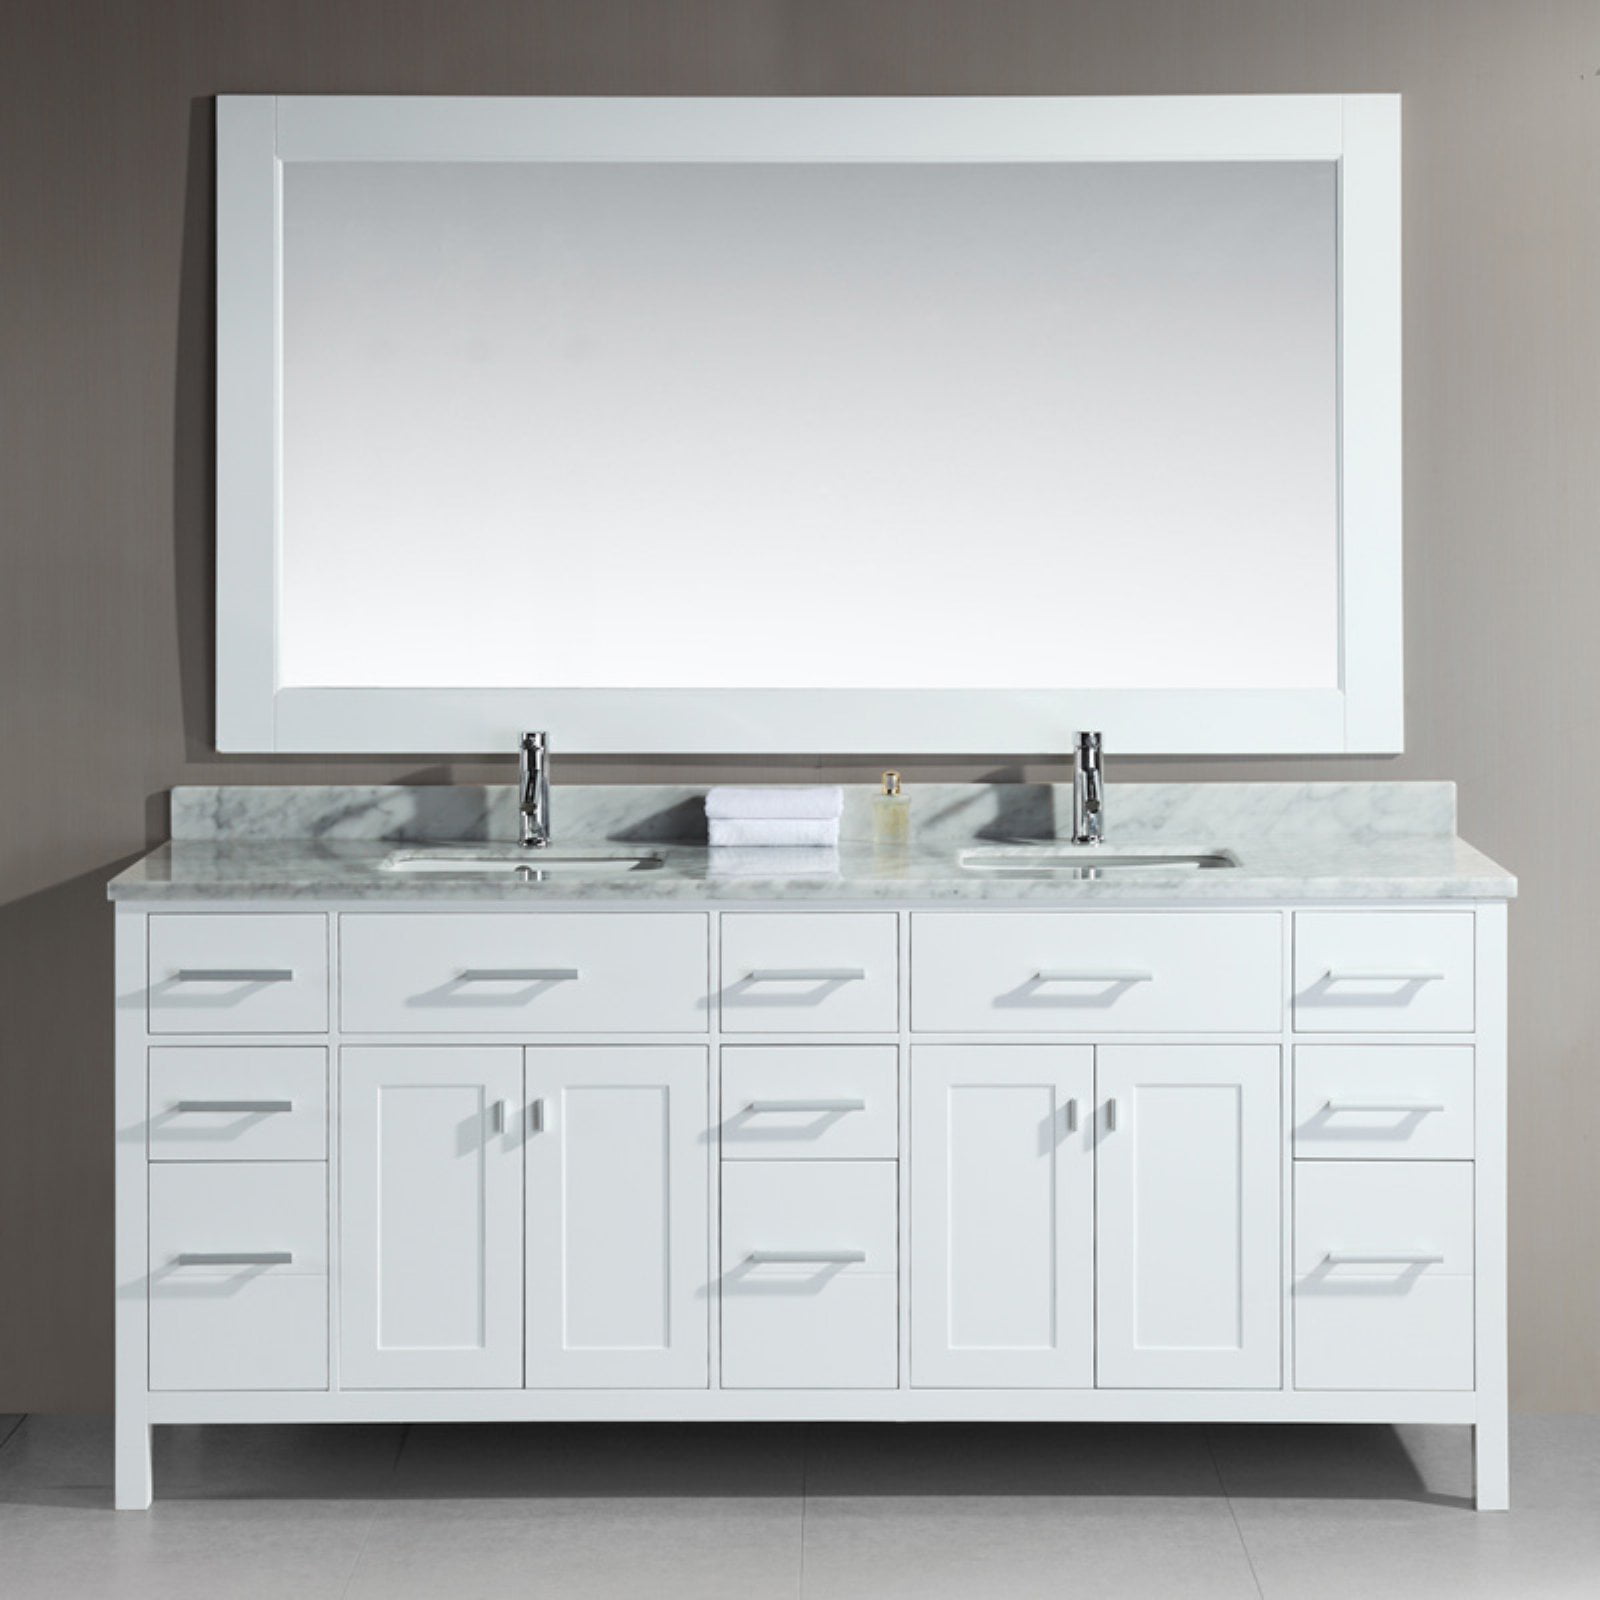 Design Element London 78" Double Sink Bathroom Vanity Set in White with